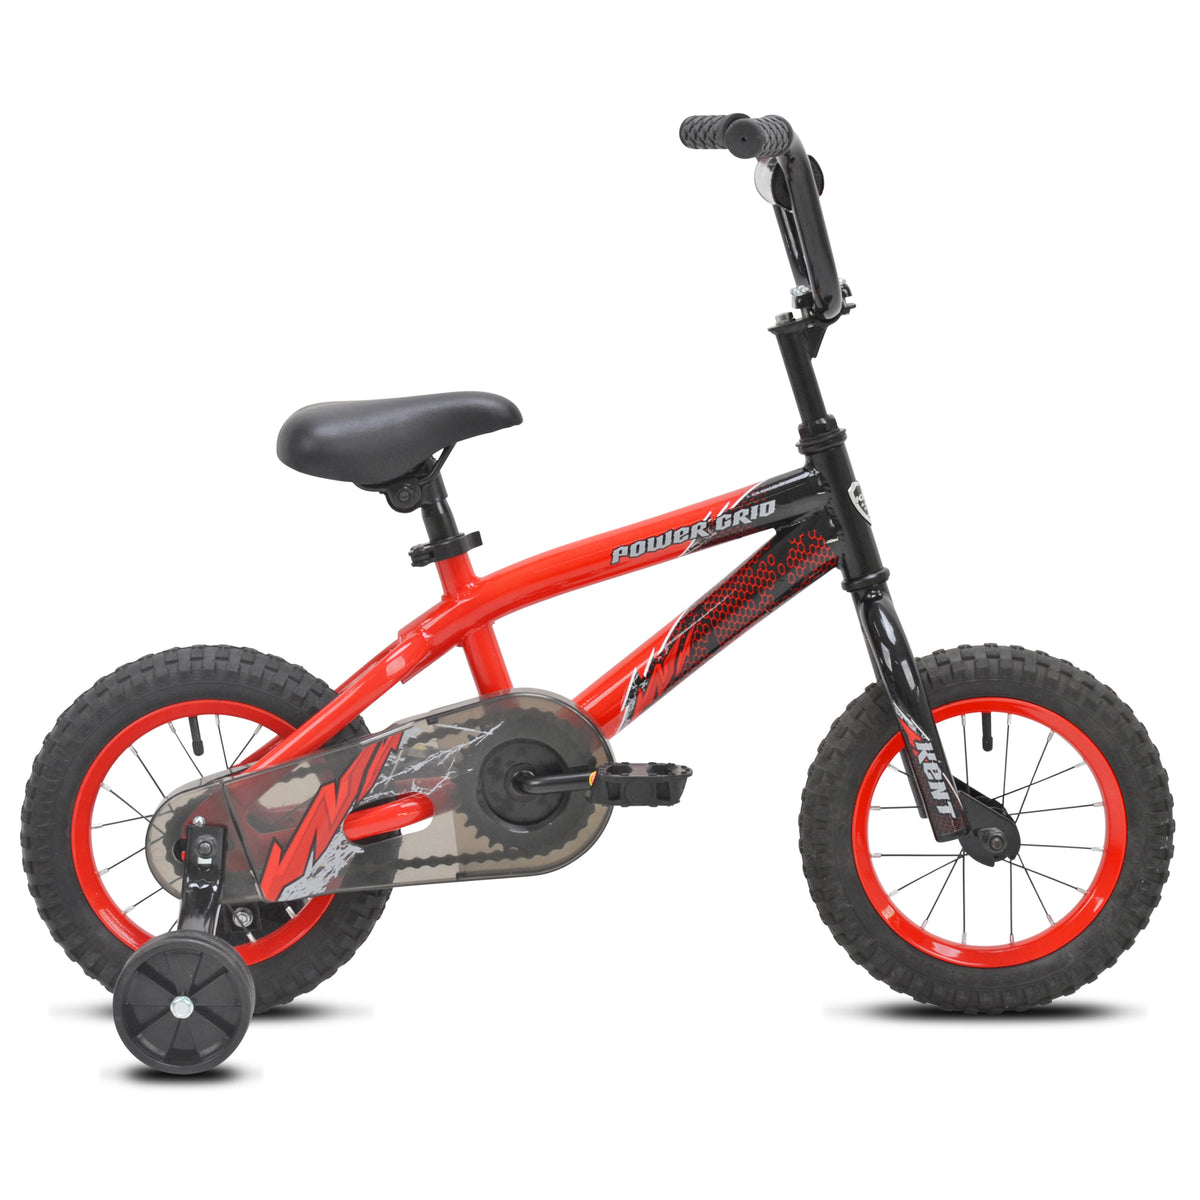 12" Kent Power Grid | Bike for Kids Ages 2-4